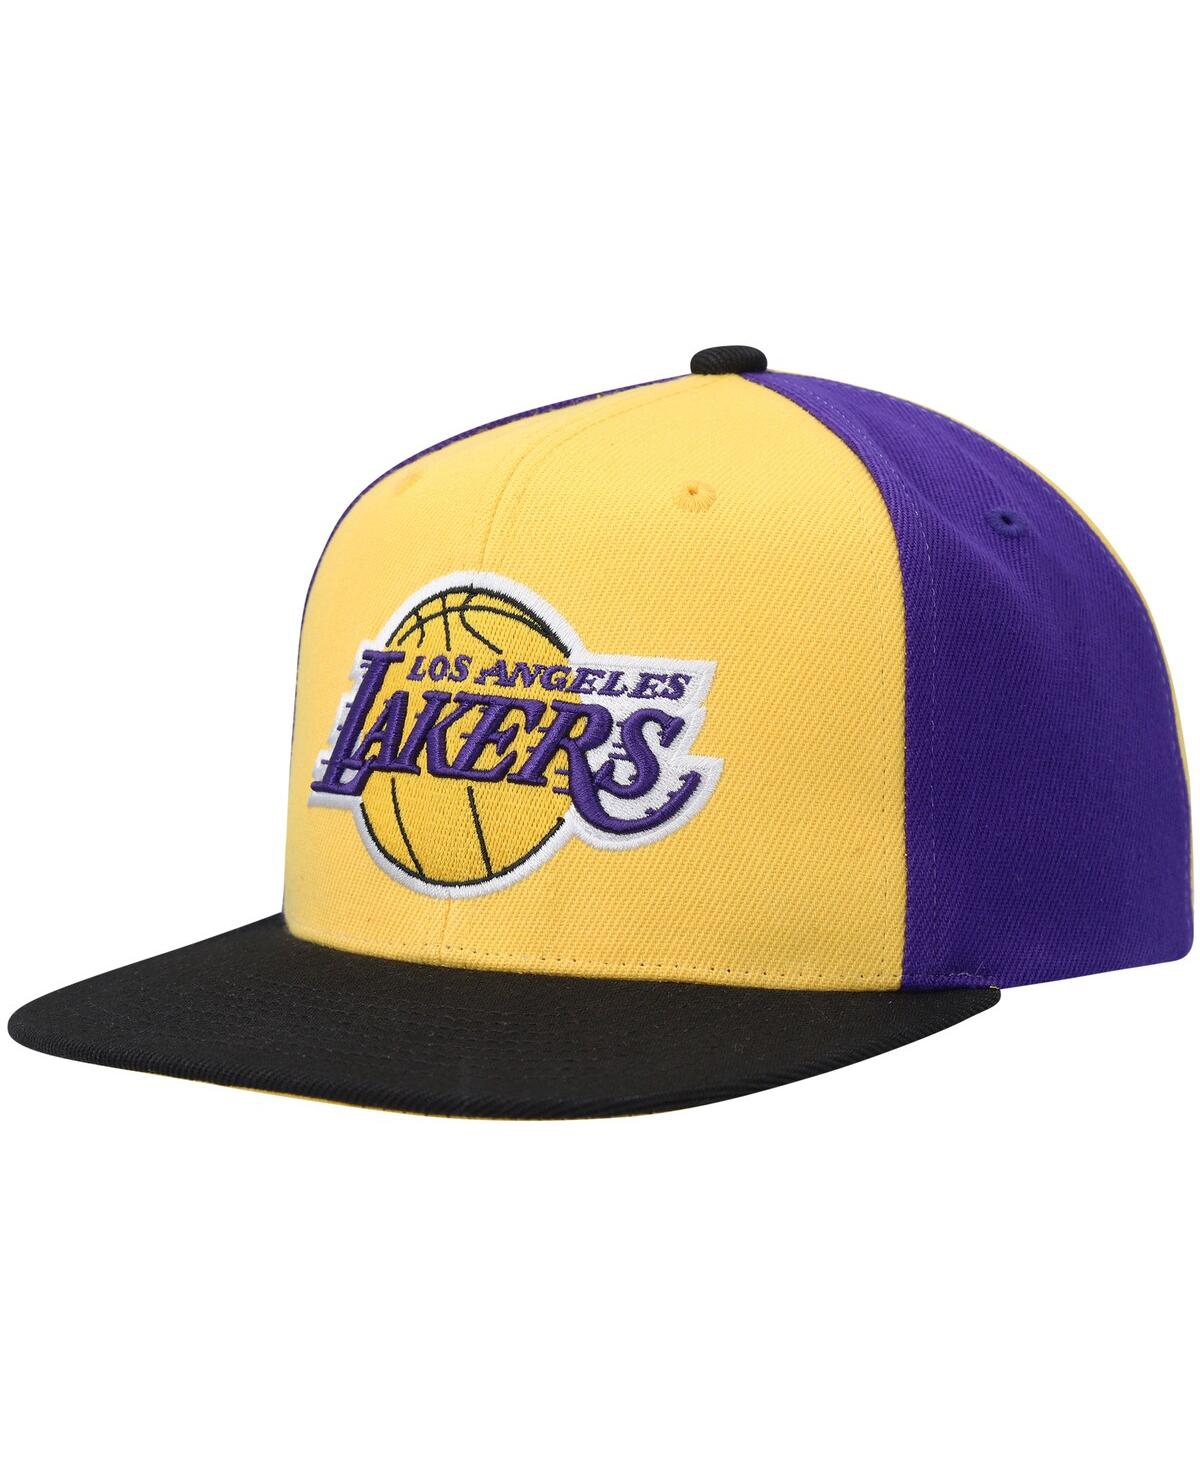 Shop Mitchell & Ness Men's  Gold Los Angeles Lakers On The Block Snapback Hat